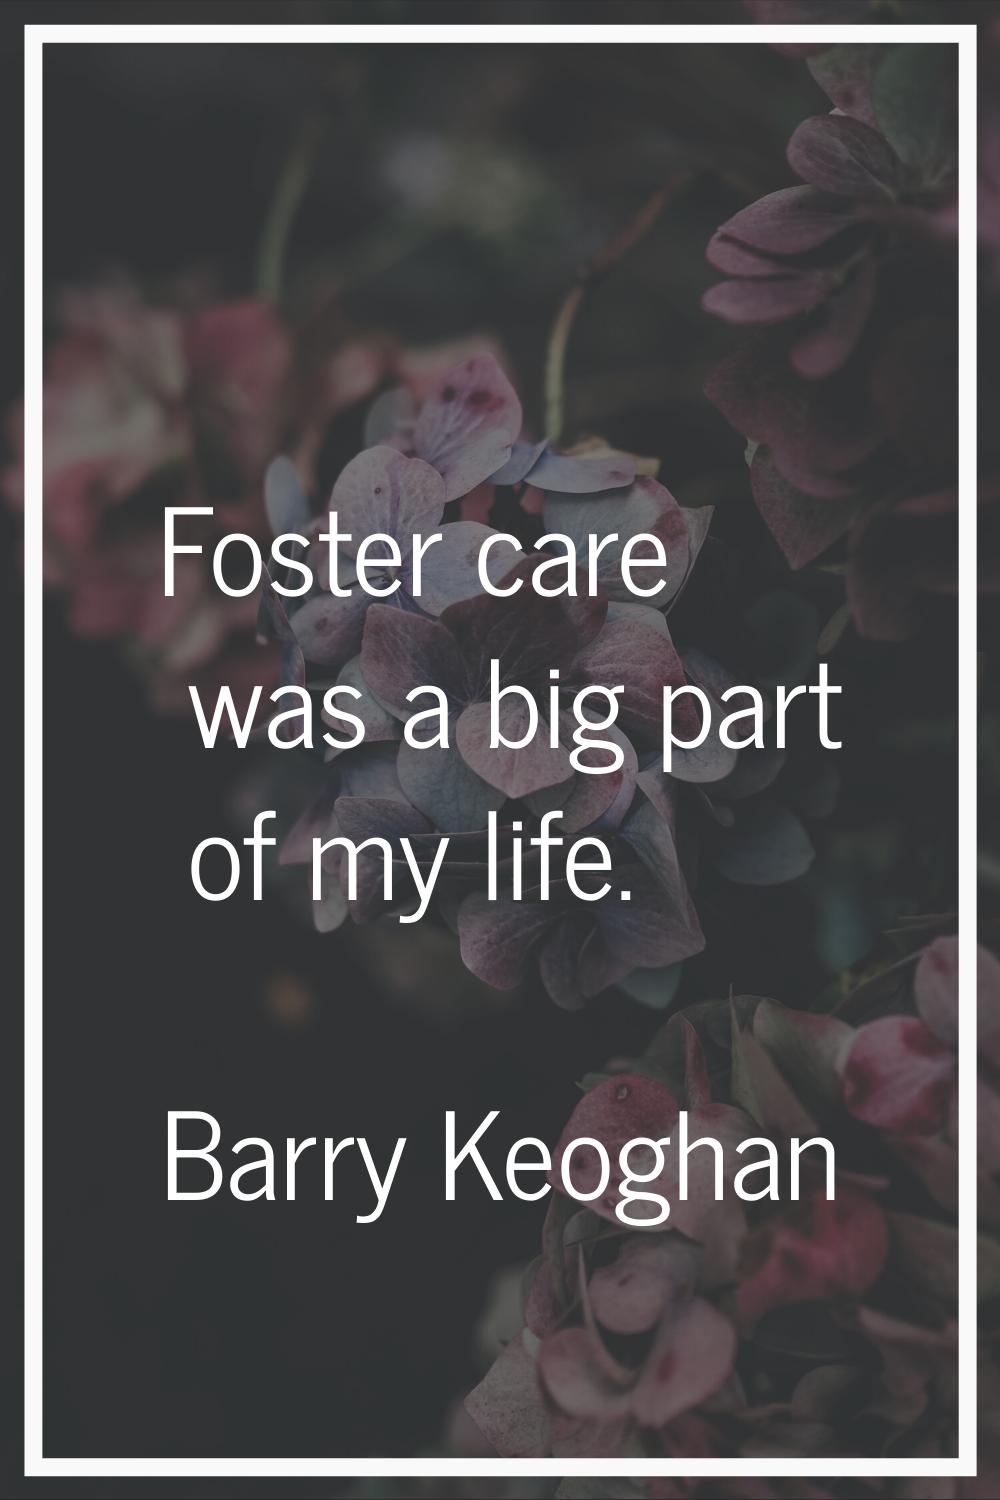 Foster care was a big part of my life.